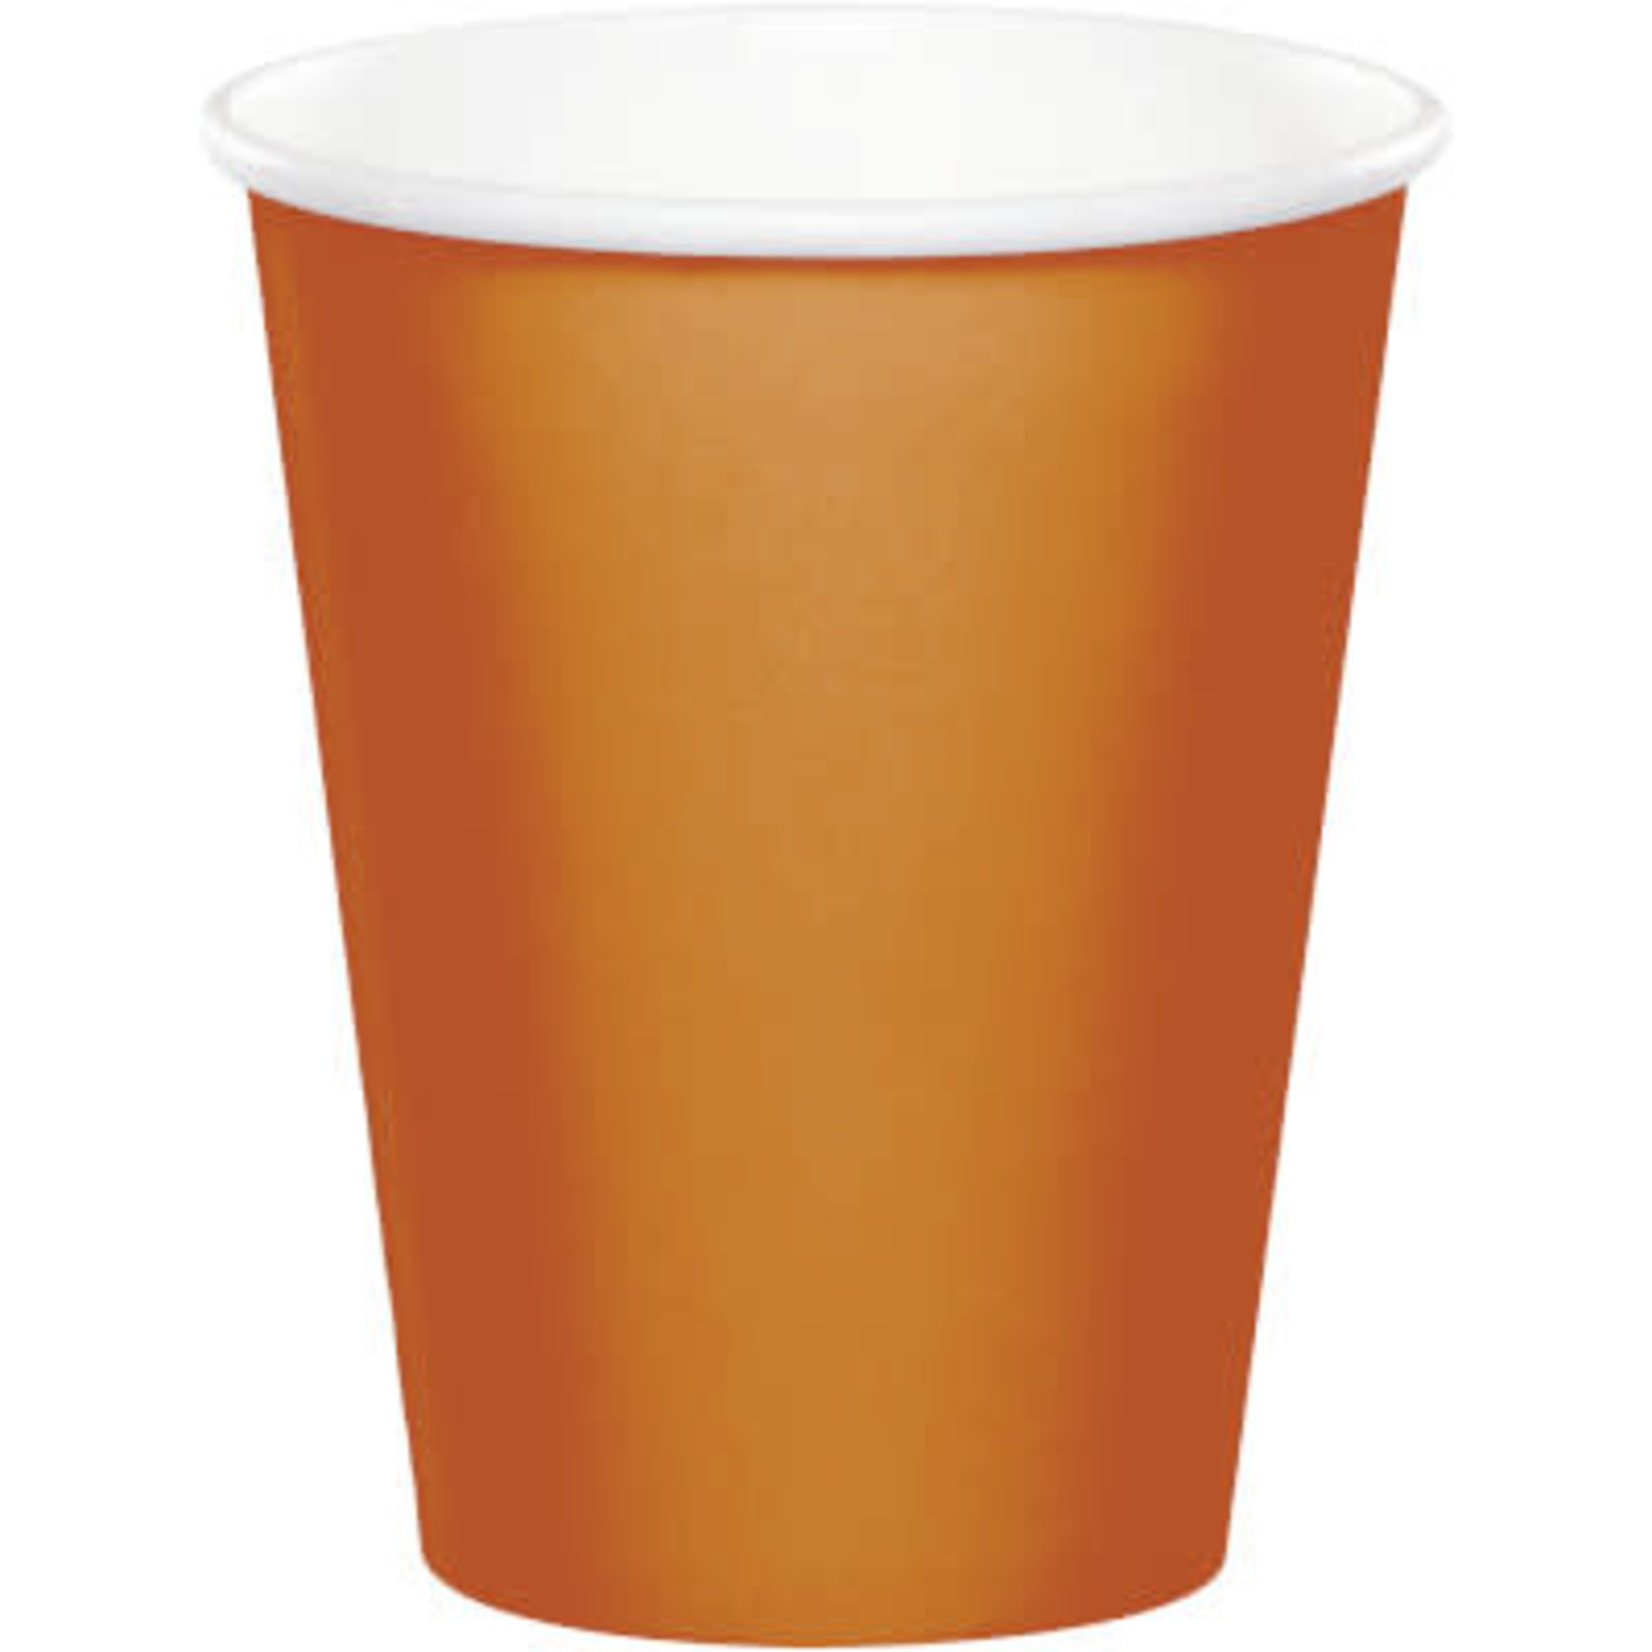 Touch of Color 9oz. Pumpkin Spice Orange Hot/Cold Paper Cups - 24ct.